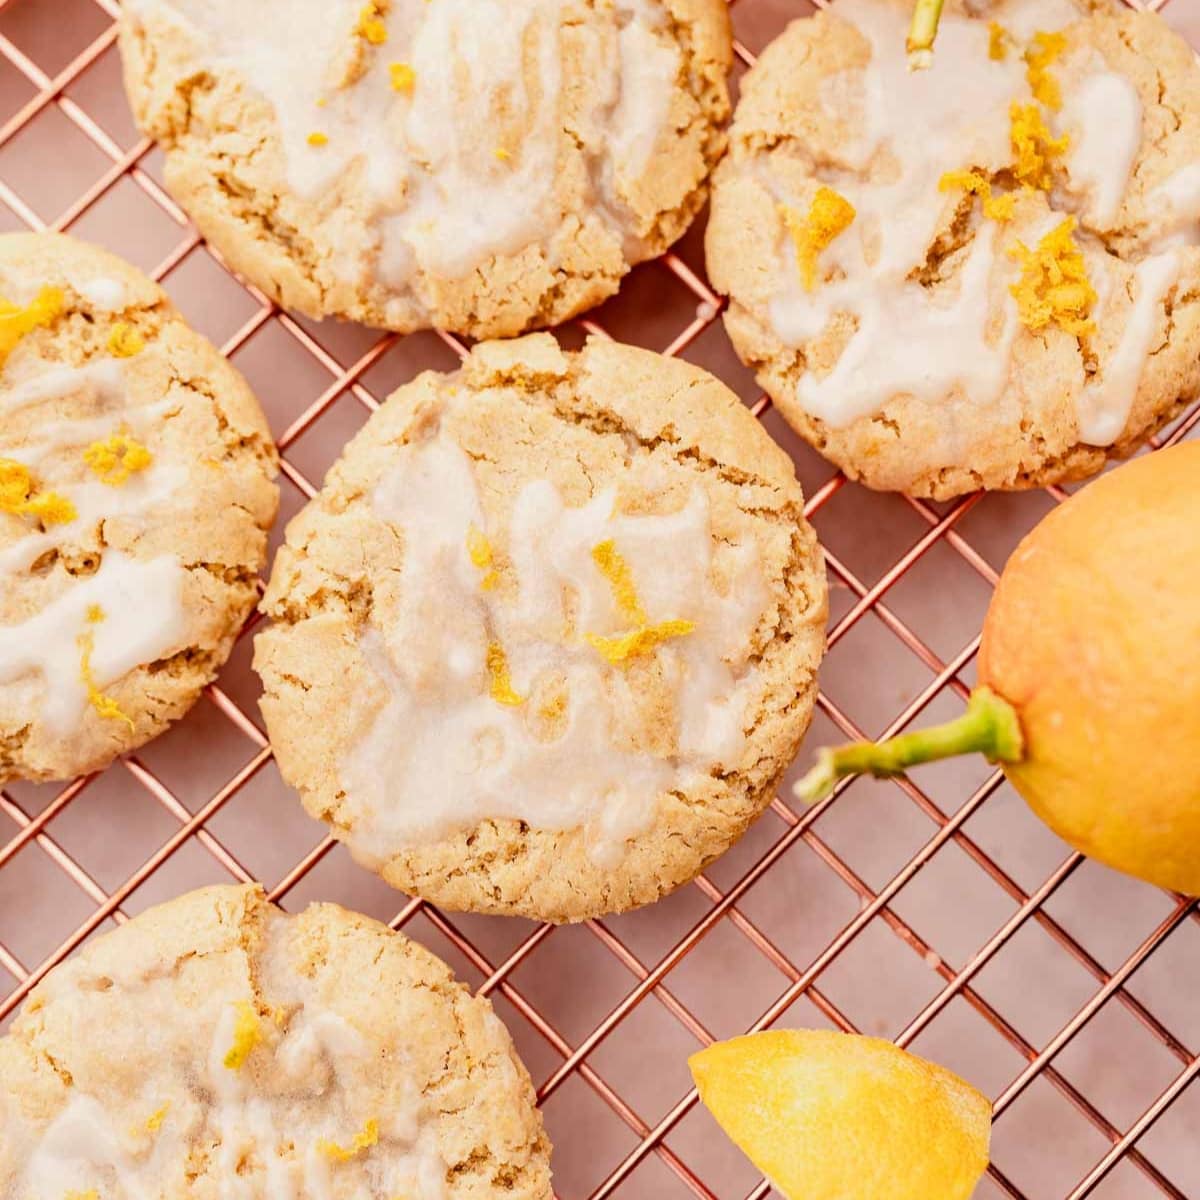 Gluten-free lemon cookies with icing on a cooling rack.